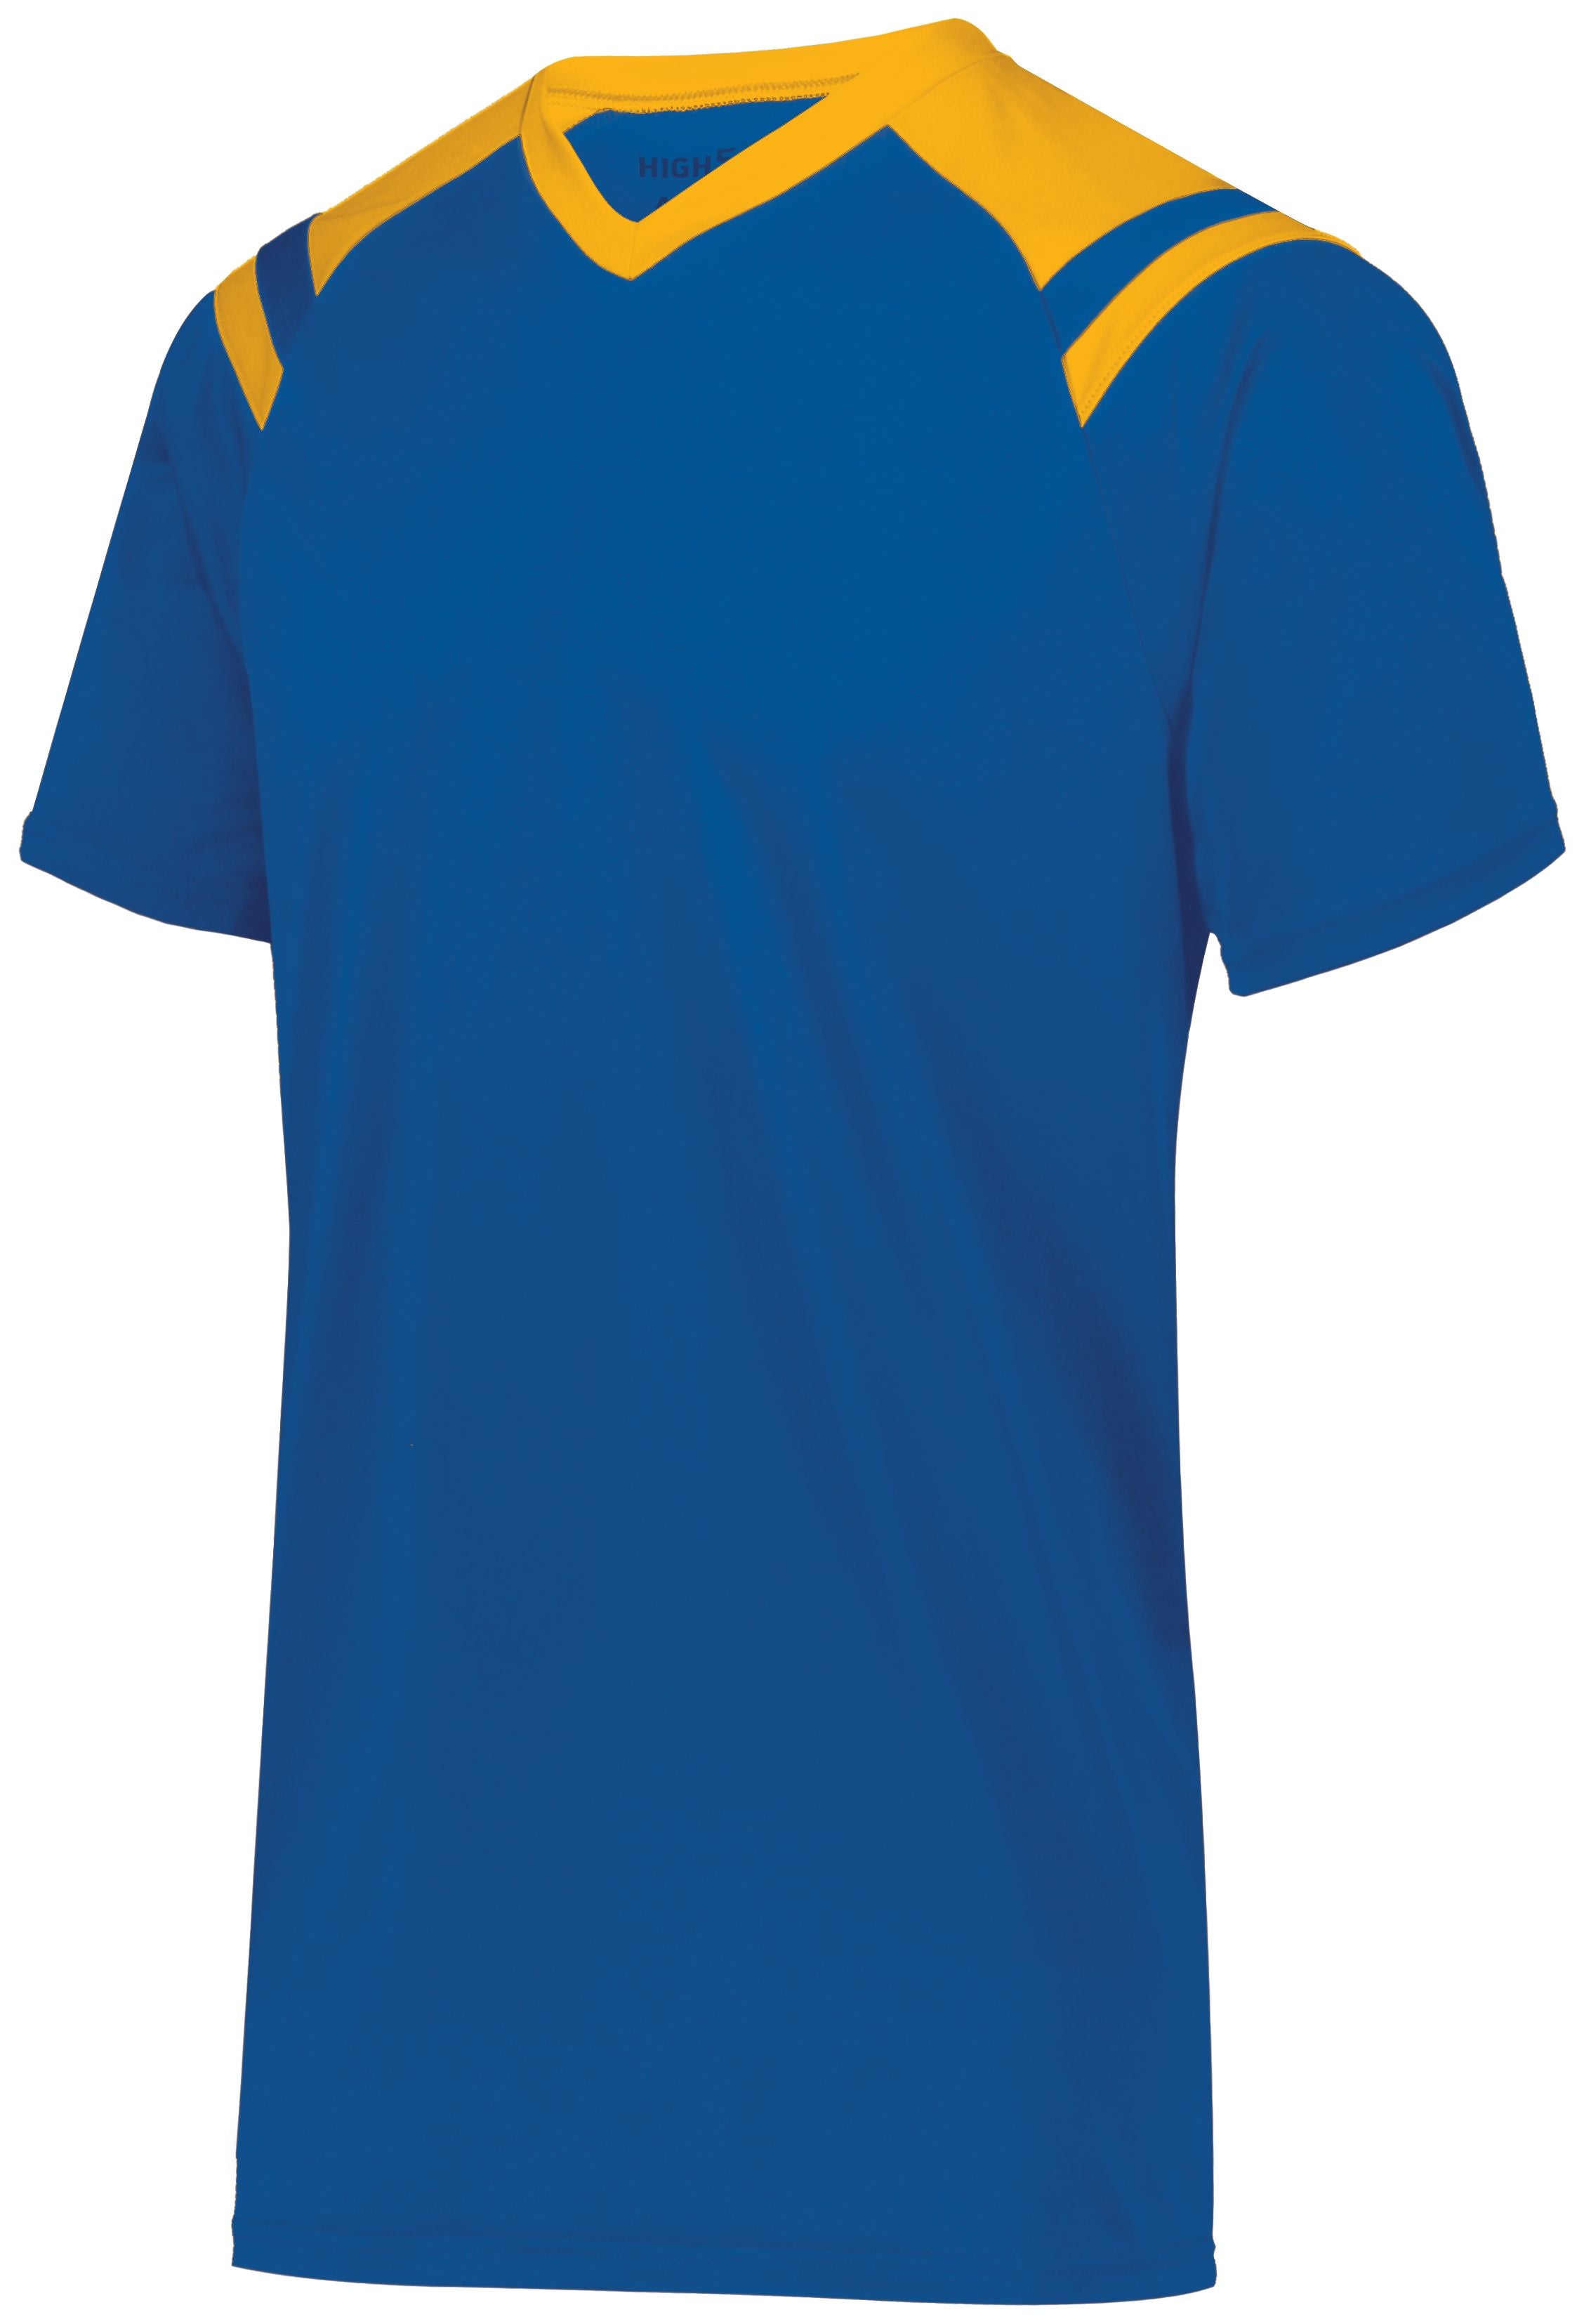 High 5 Sheffield Jersey in Royal/Gold  -Part of the Adult, Adult-Jersey, High5-Products, Soccer, Shirts, All-Sports-1, Sheffield-Soccer-Jerseys product lines at KanaleyCreations.com